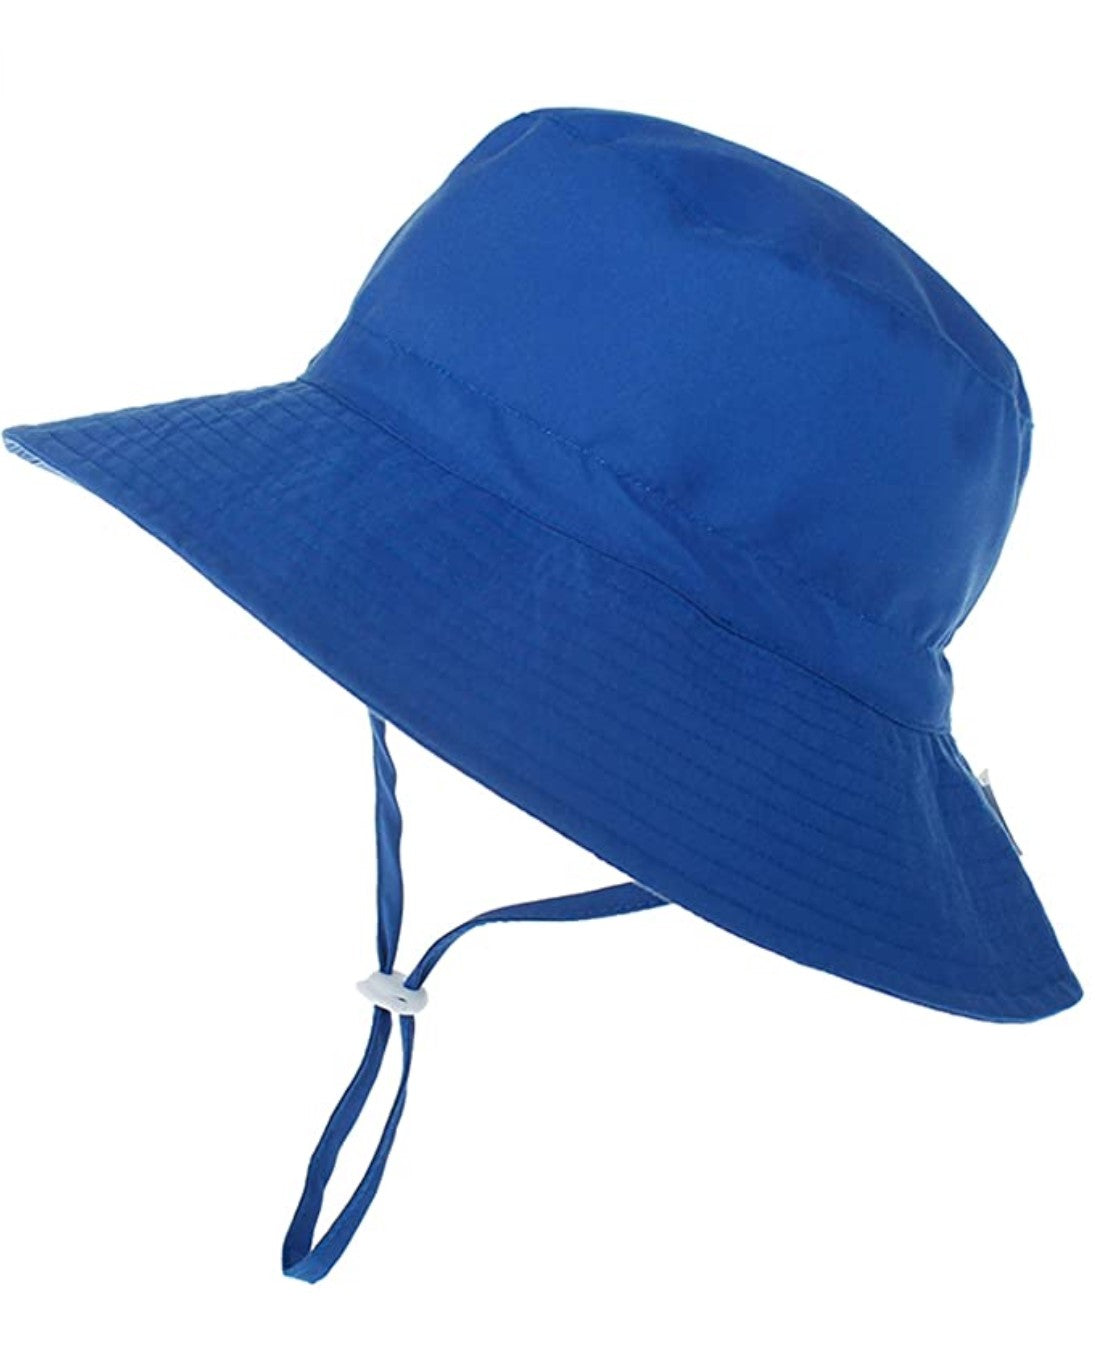 Toddler, Sun Protection Bucket Hat (Royal Blue)